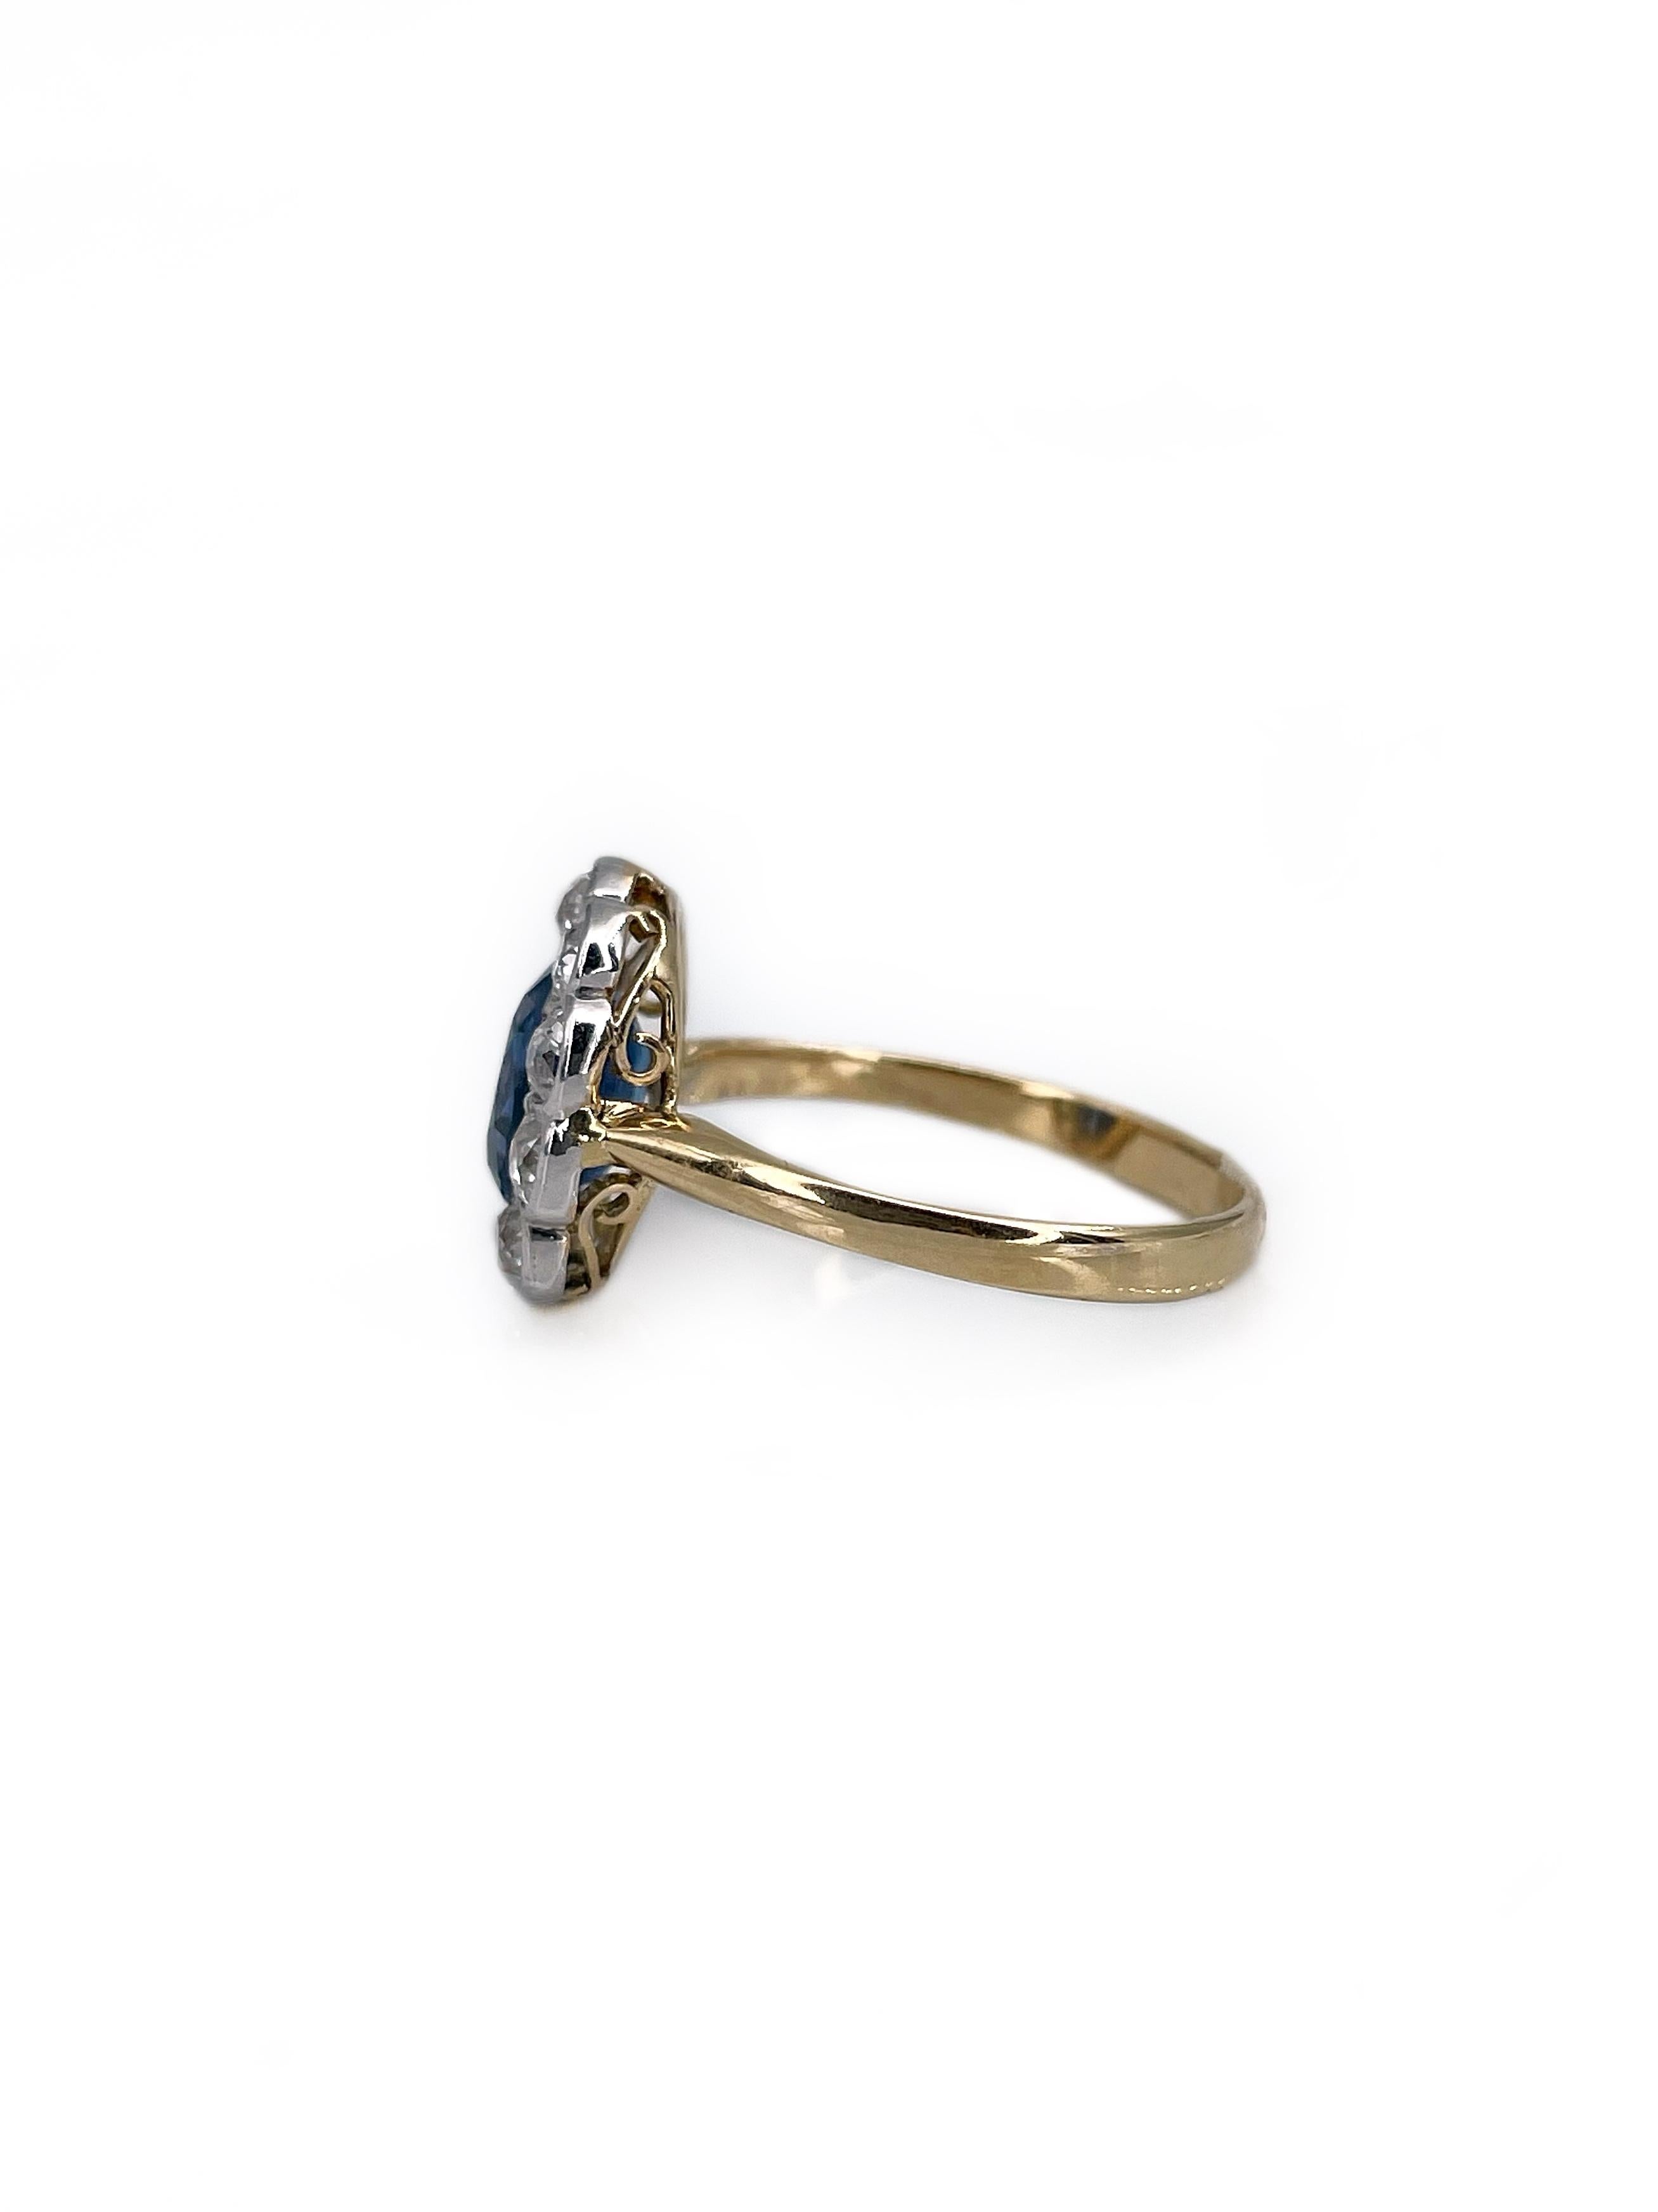 It is a beautiful antique Victorian cluster ring crafted in 14K yellow gold. The piece features oval blue sapphire: 1.00ct, B 7/5, I1. The gem is surrounded by 10 old cut diamonds: TW 1.00ct, RW-W, VS-SI1.

Weight: 3.24g
Size: 18.5 (US